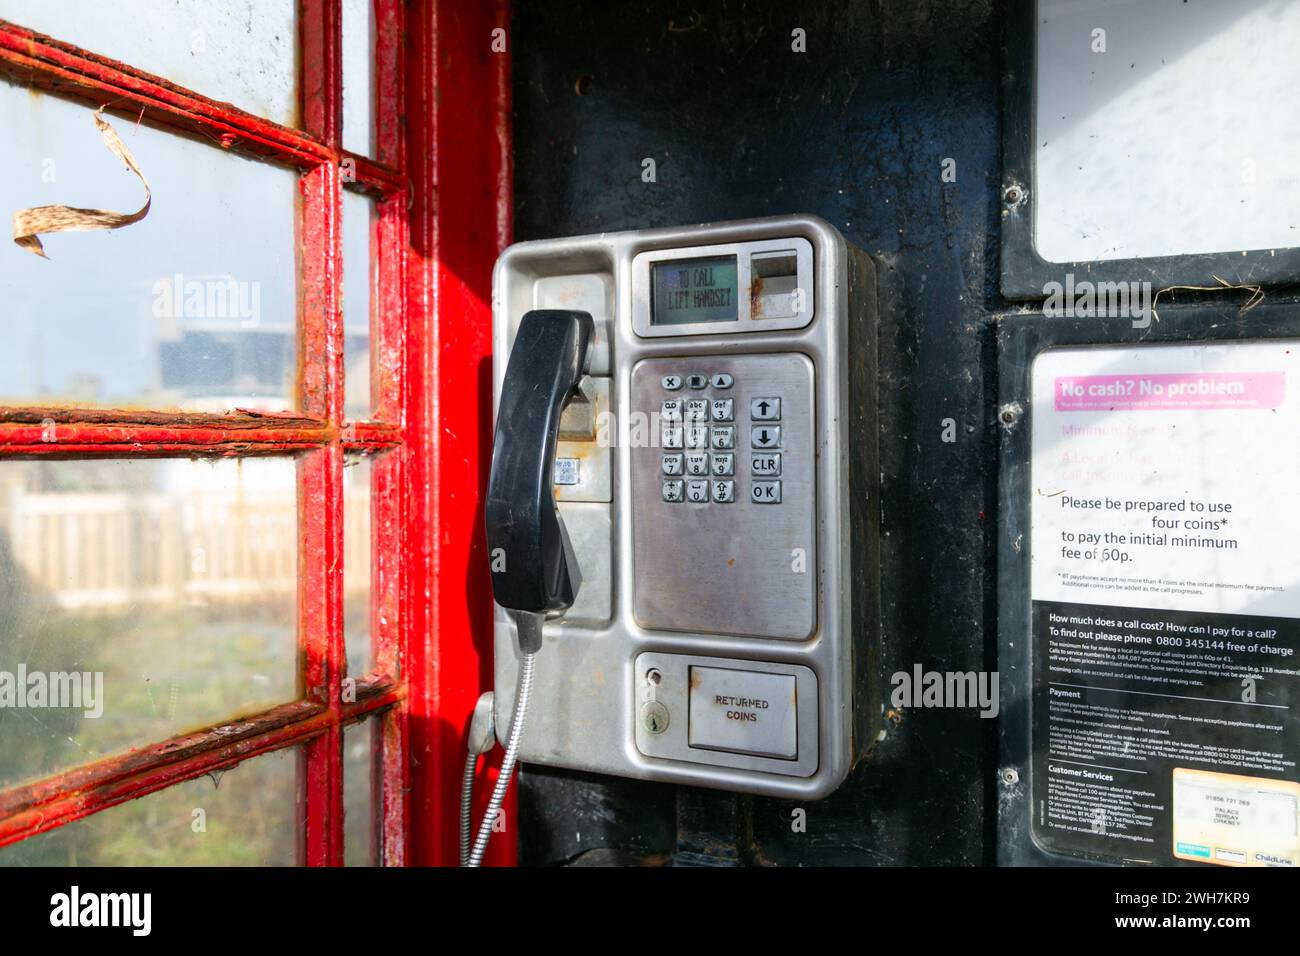 Old public telephone box or kiosk with a push-button and handset, UK Stock Photo